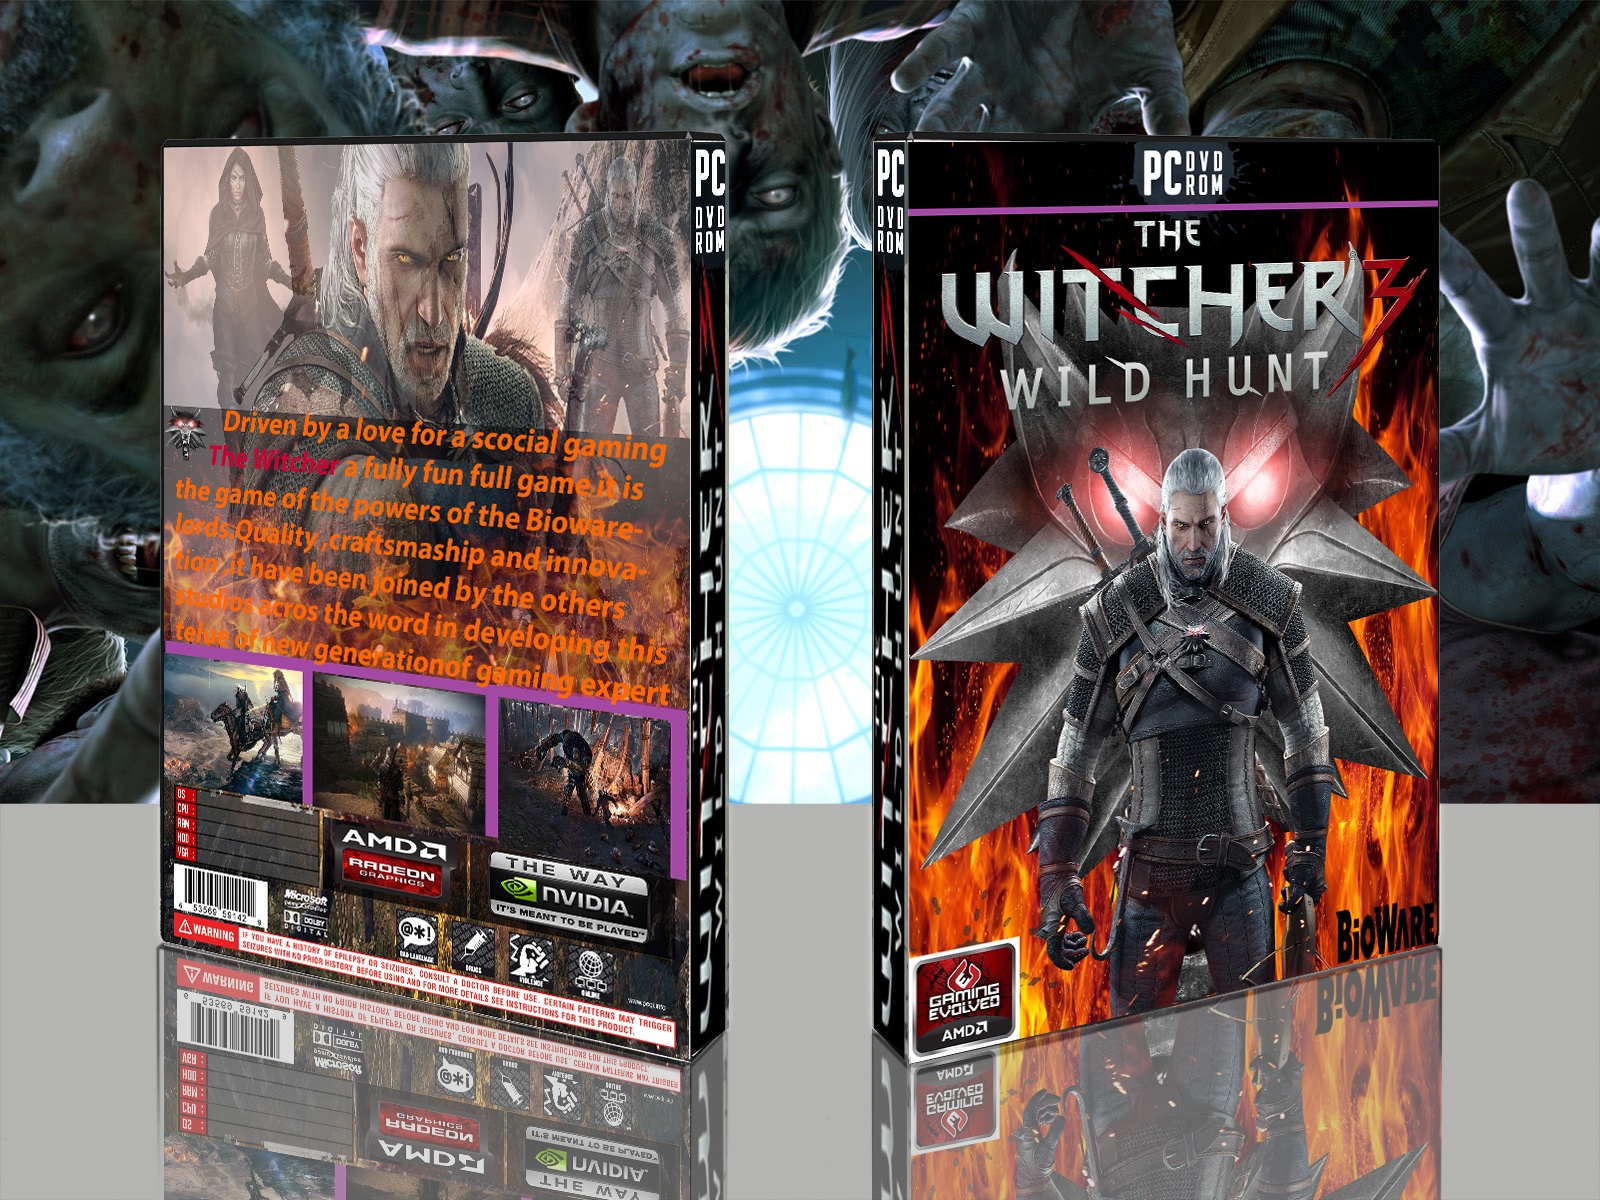 The Witcher 3 Wild Hunt box cover